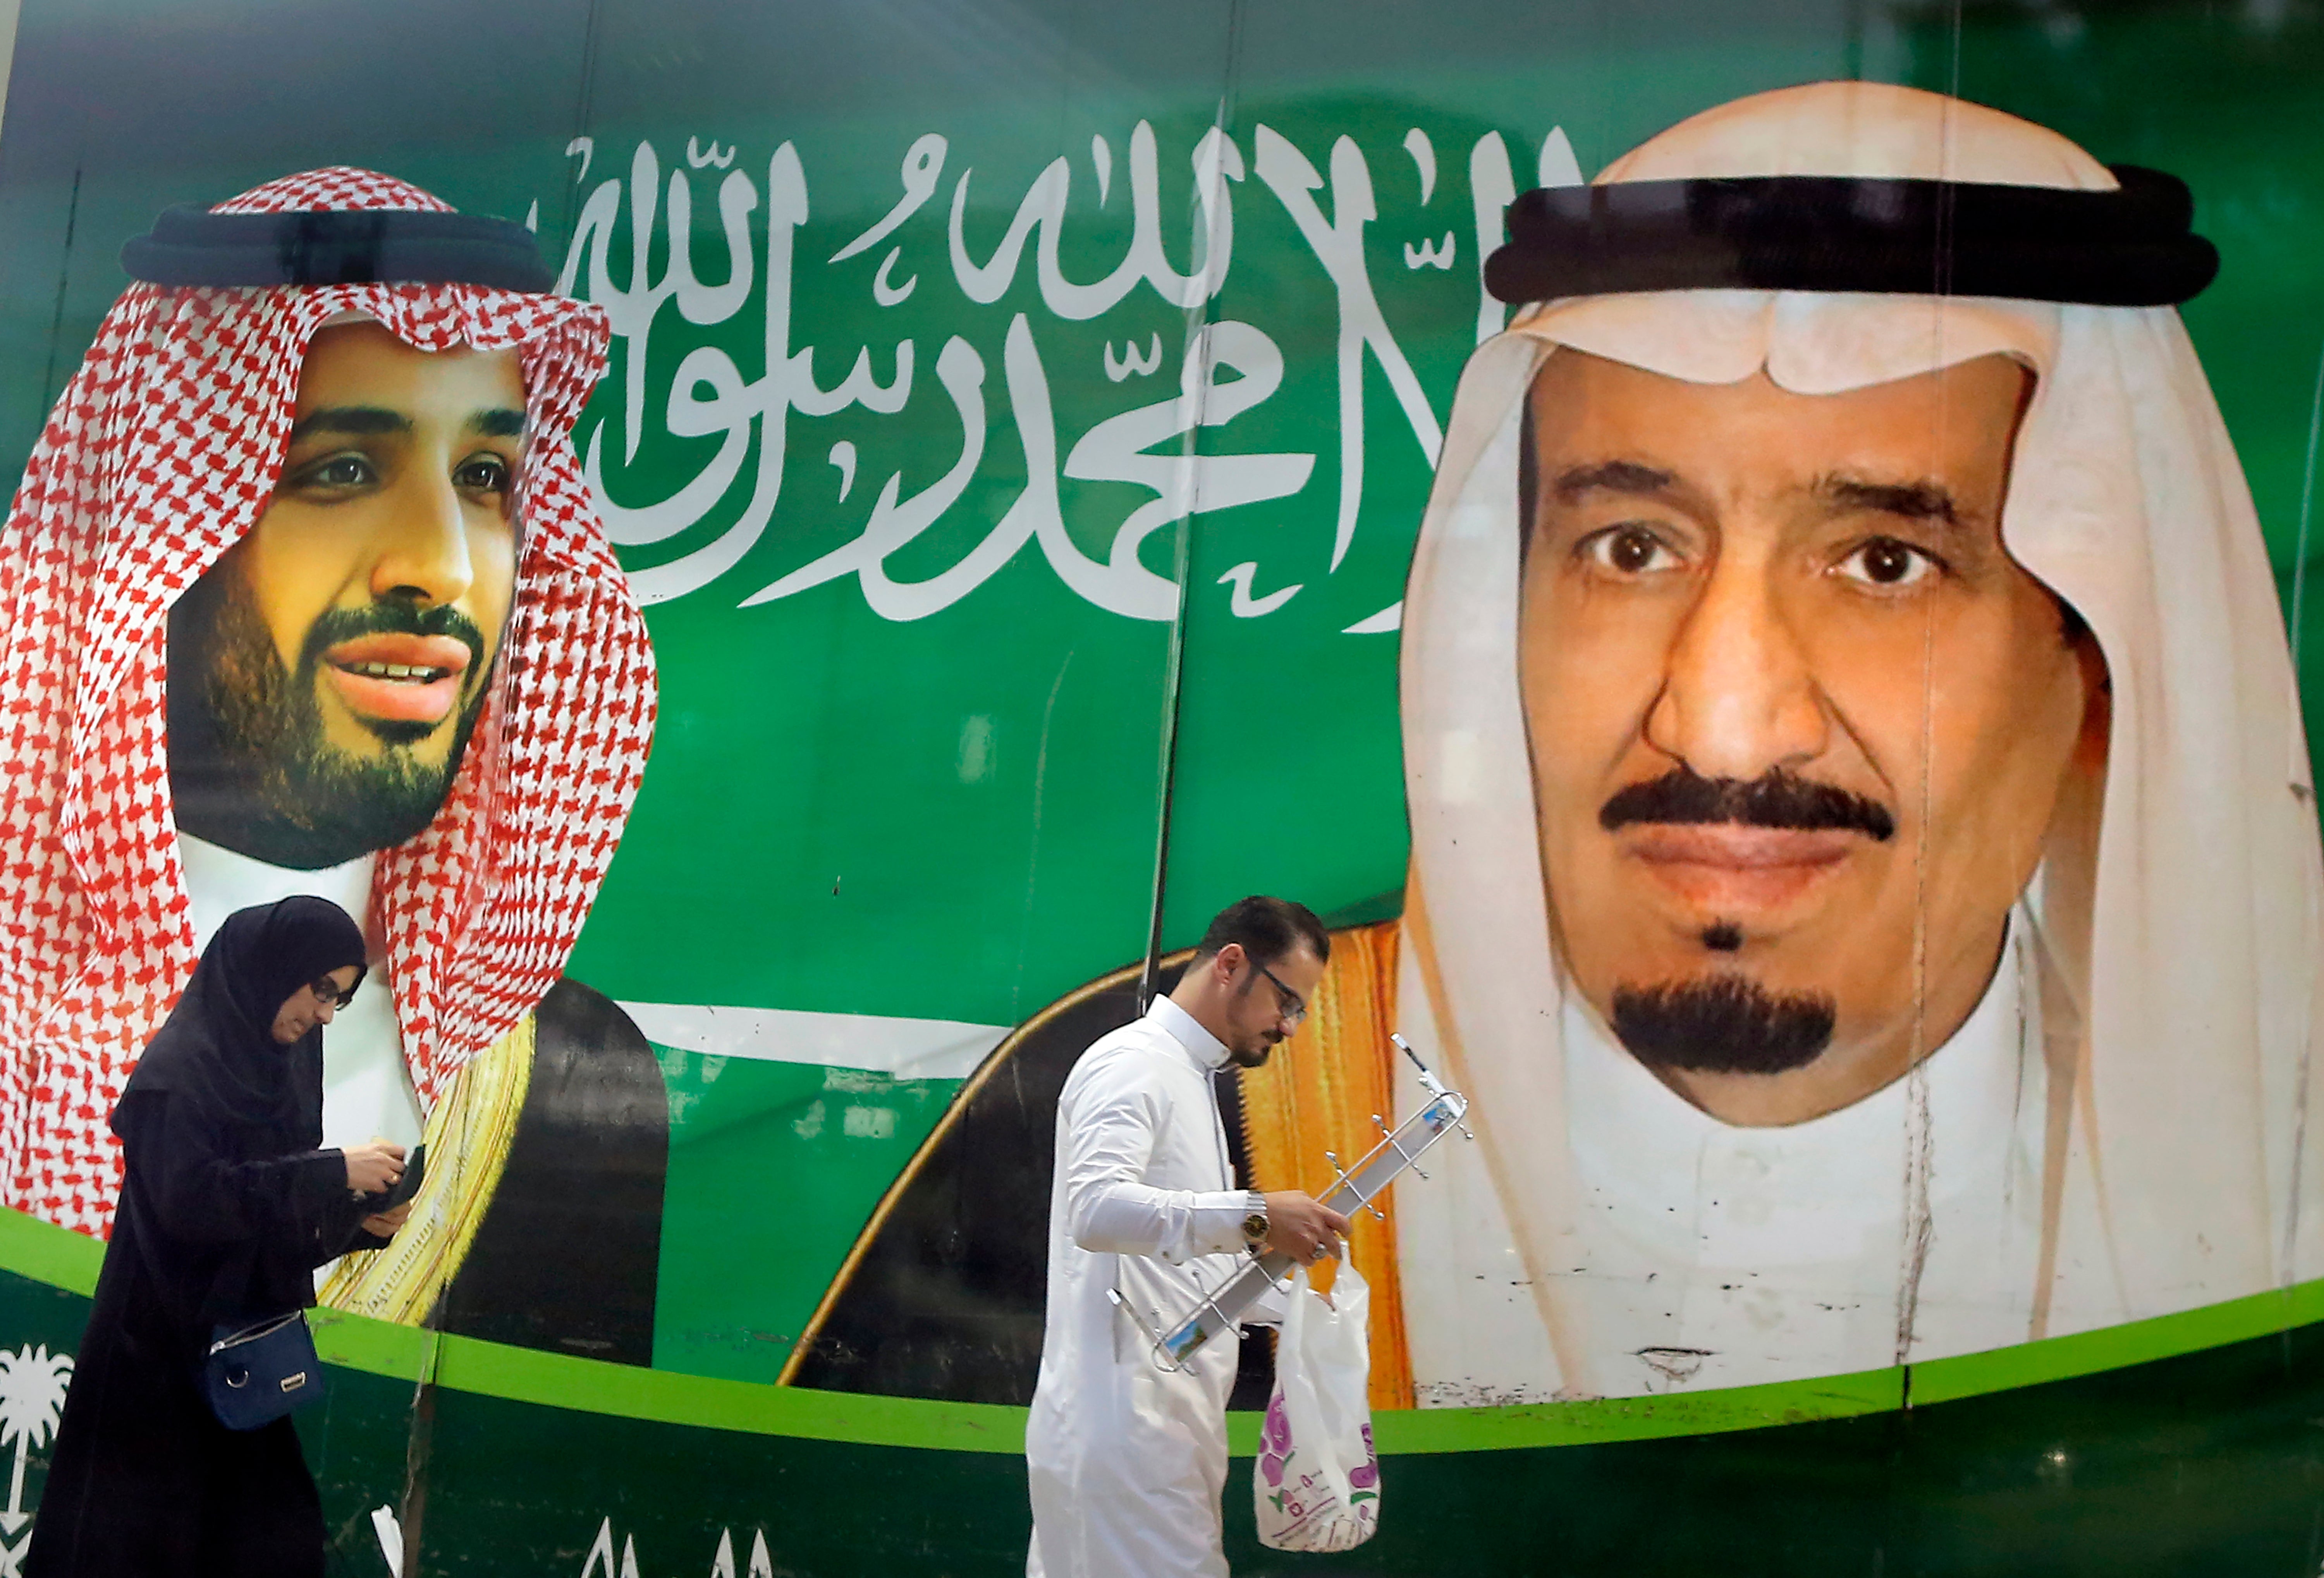 Images of King Salman, right, and Crown Prince Mohammed bin Salman, outside a mall in Jeddah